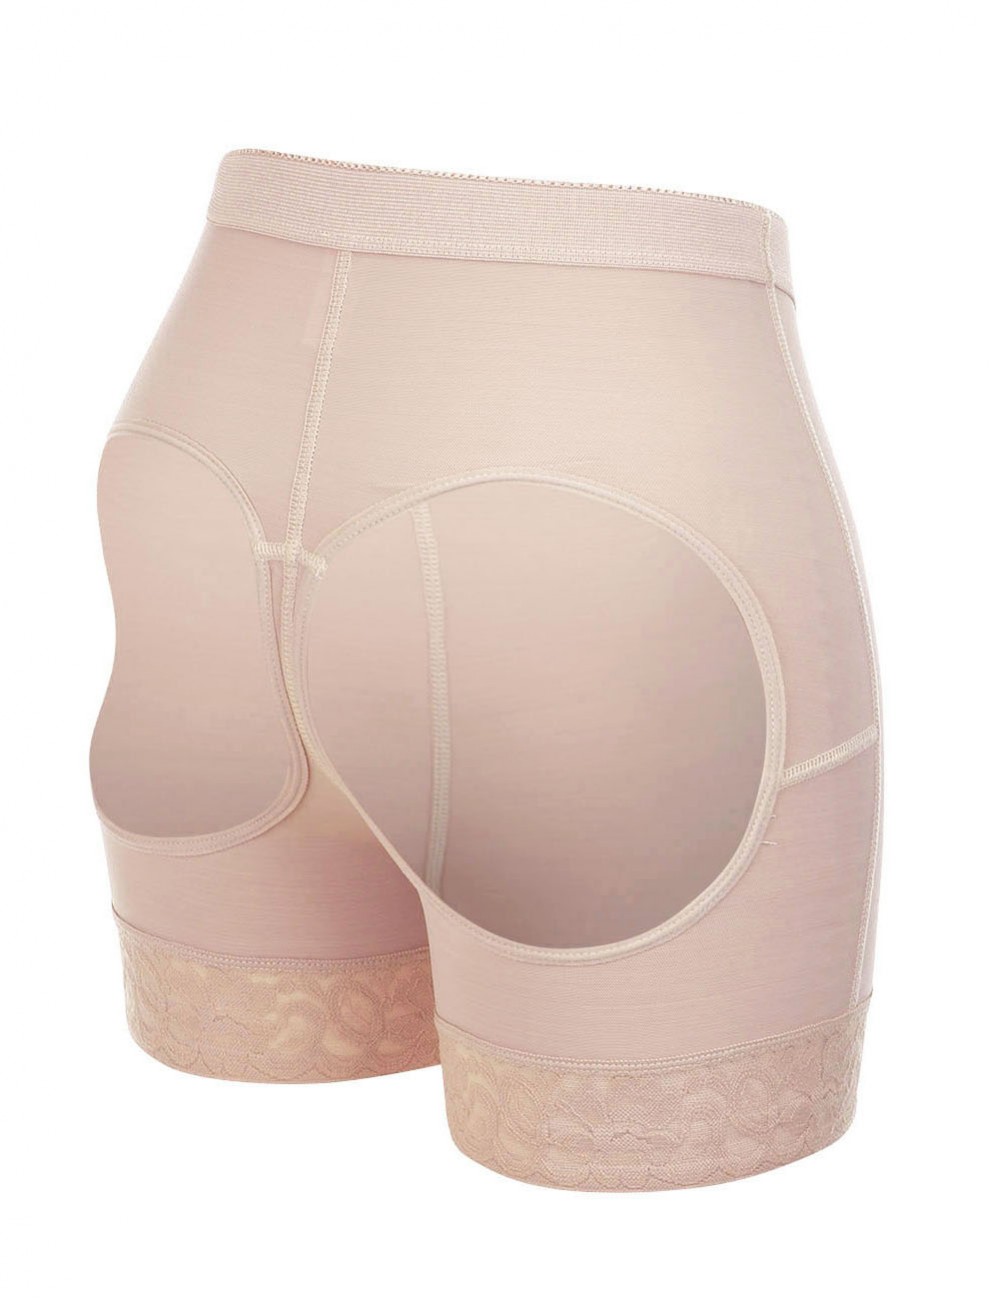 Tummy Control Nude Wide Elastic Band Butt Enhancer Panty Crotchless Slim